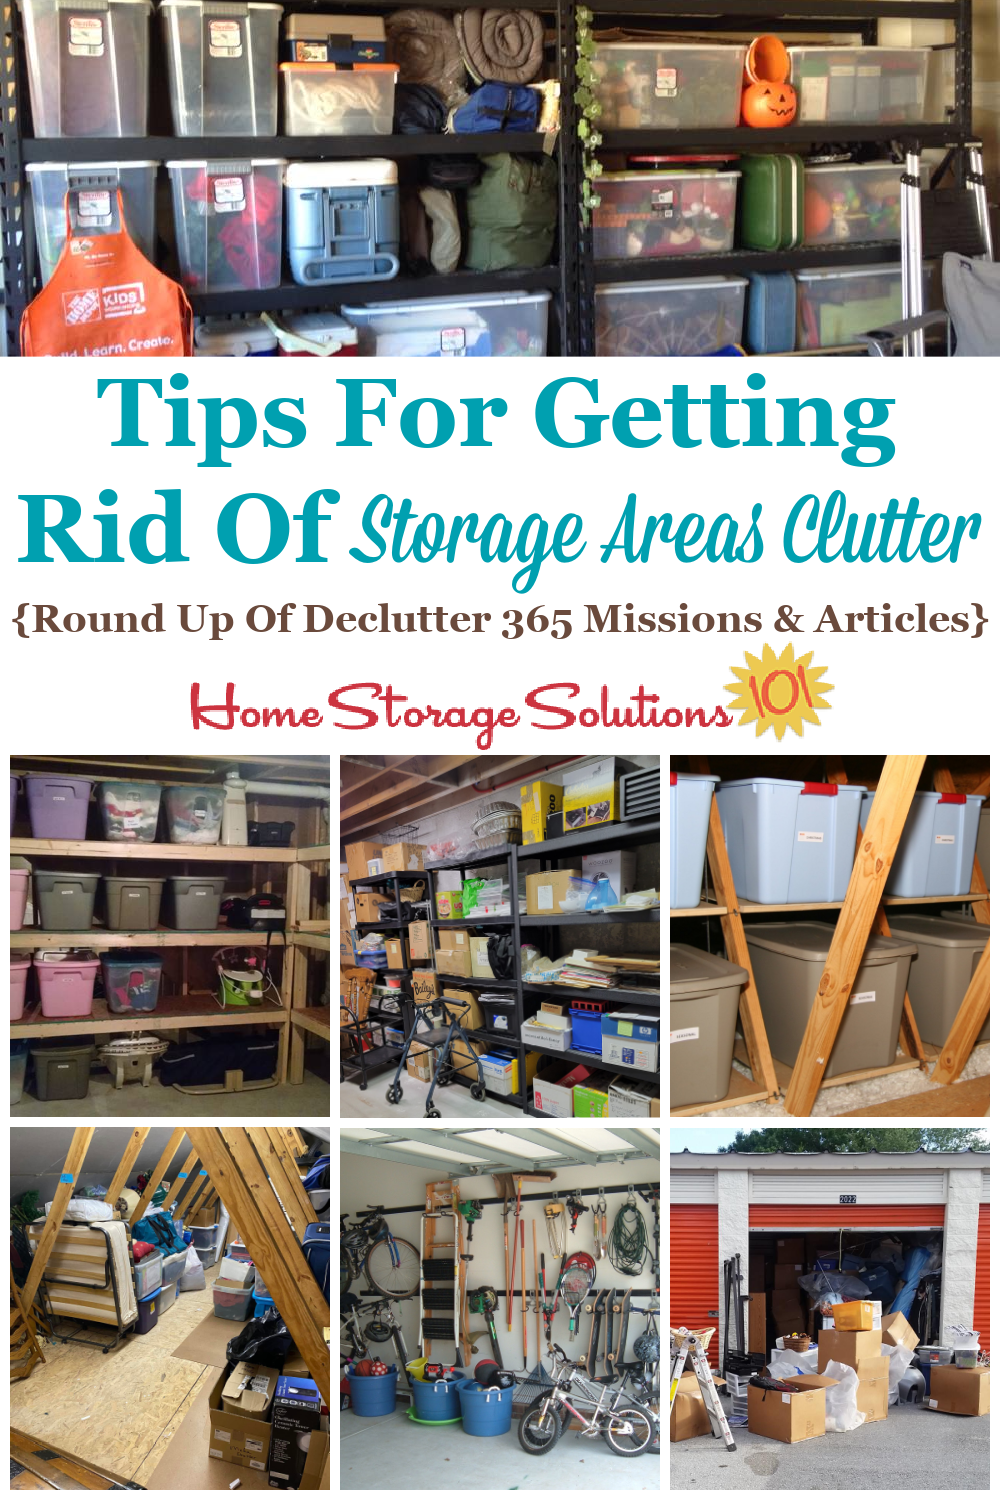 Here is a checklist of storage areas and garage clutter items to consider getting rid of, plus a round up of Declutter 365 missions and articles to help you accomplish these tasks {on Home Storage Solutions 101} #Declutter365 #GarageClutter #DeclutterStorageAreas